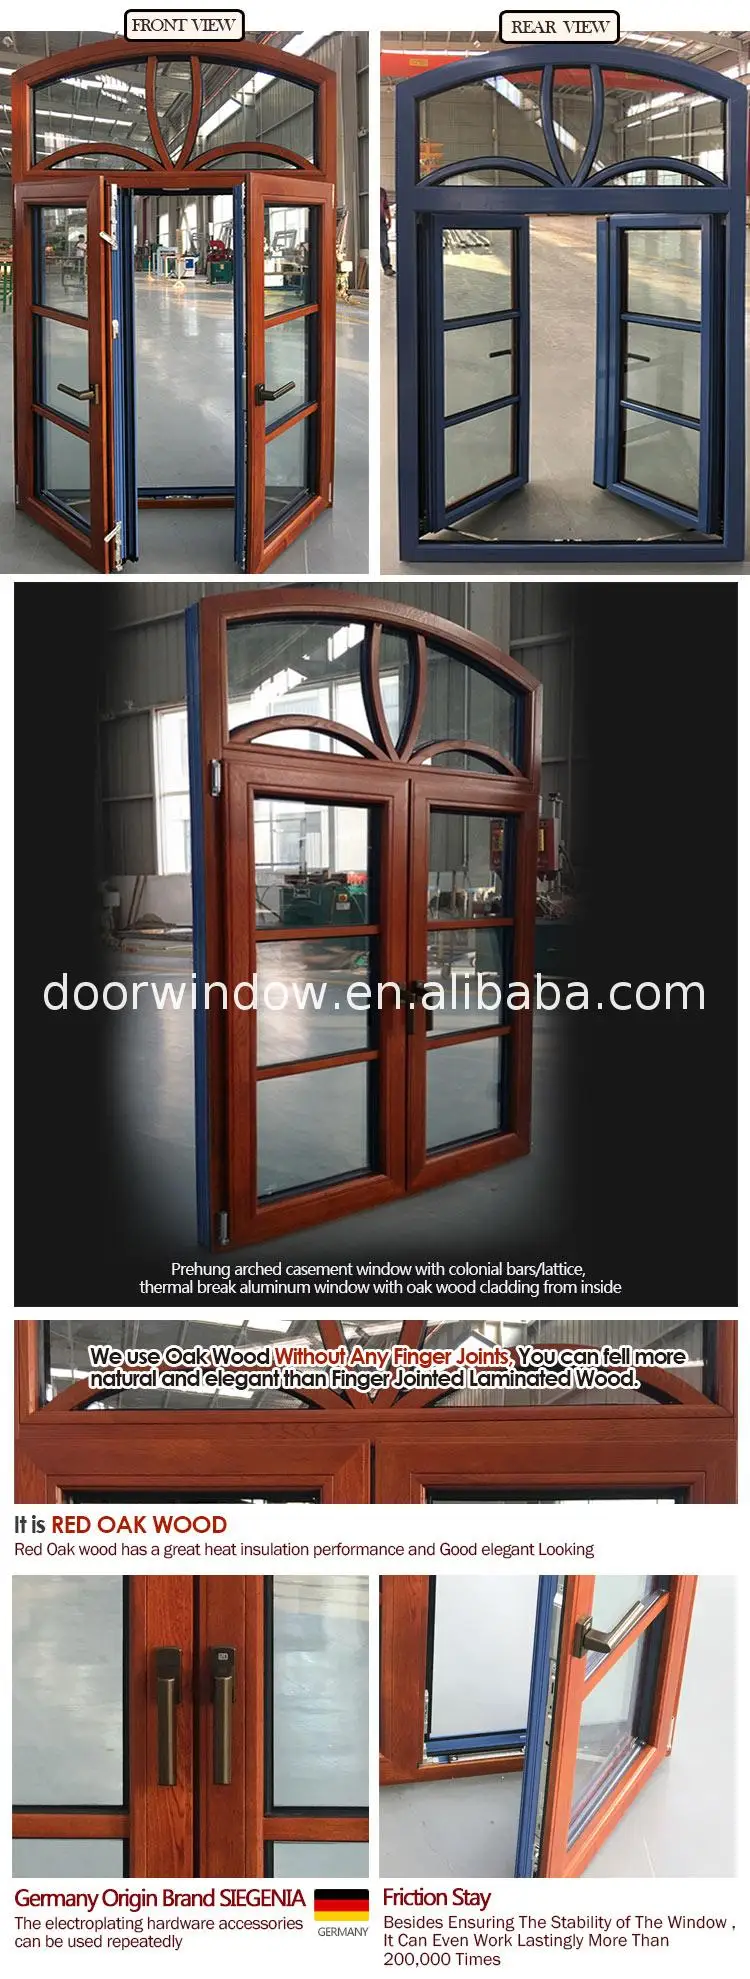 Good quality and price of wooden sash window manufacturers french windows doors